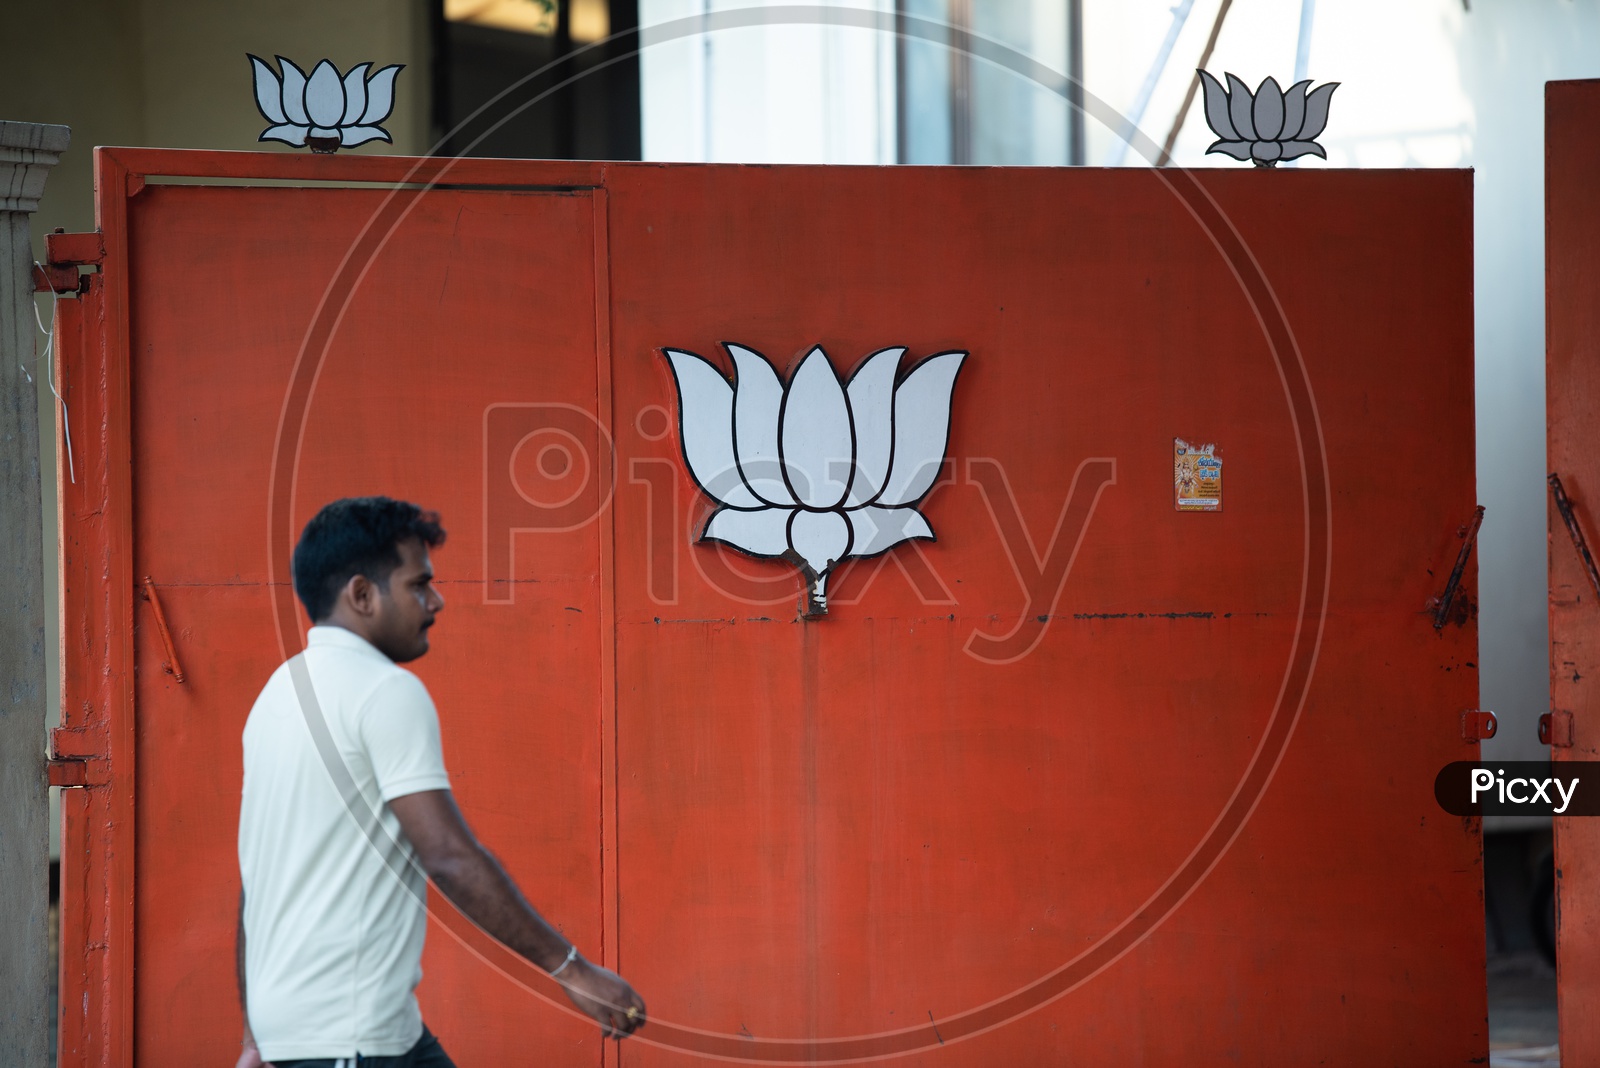 BJP Party Symbol  On BJP Party Office